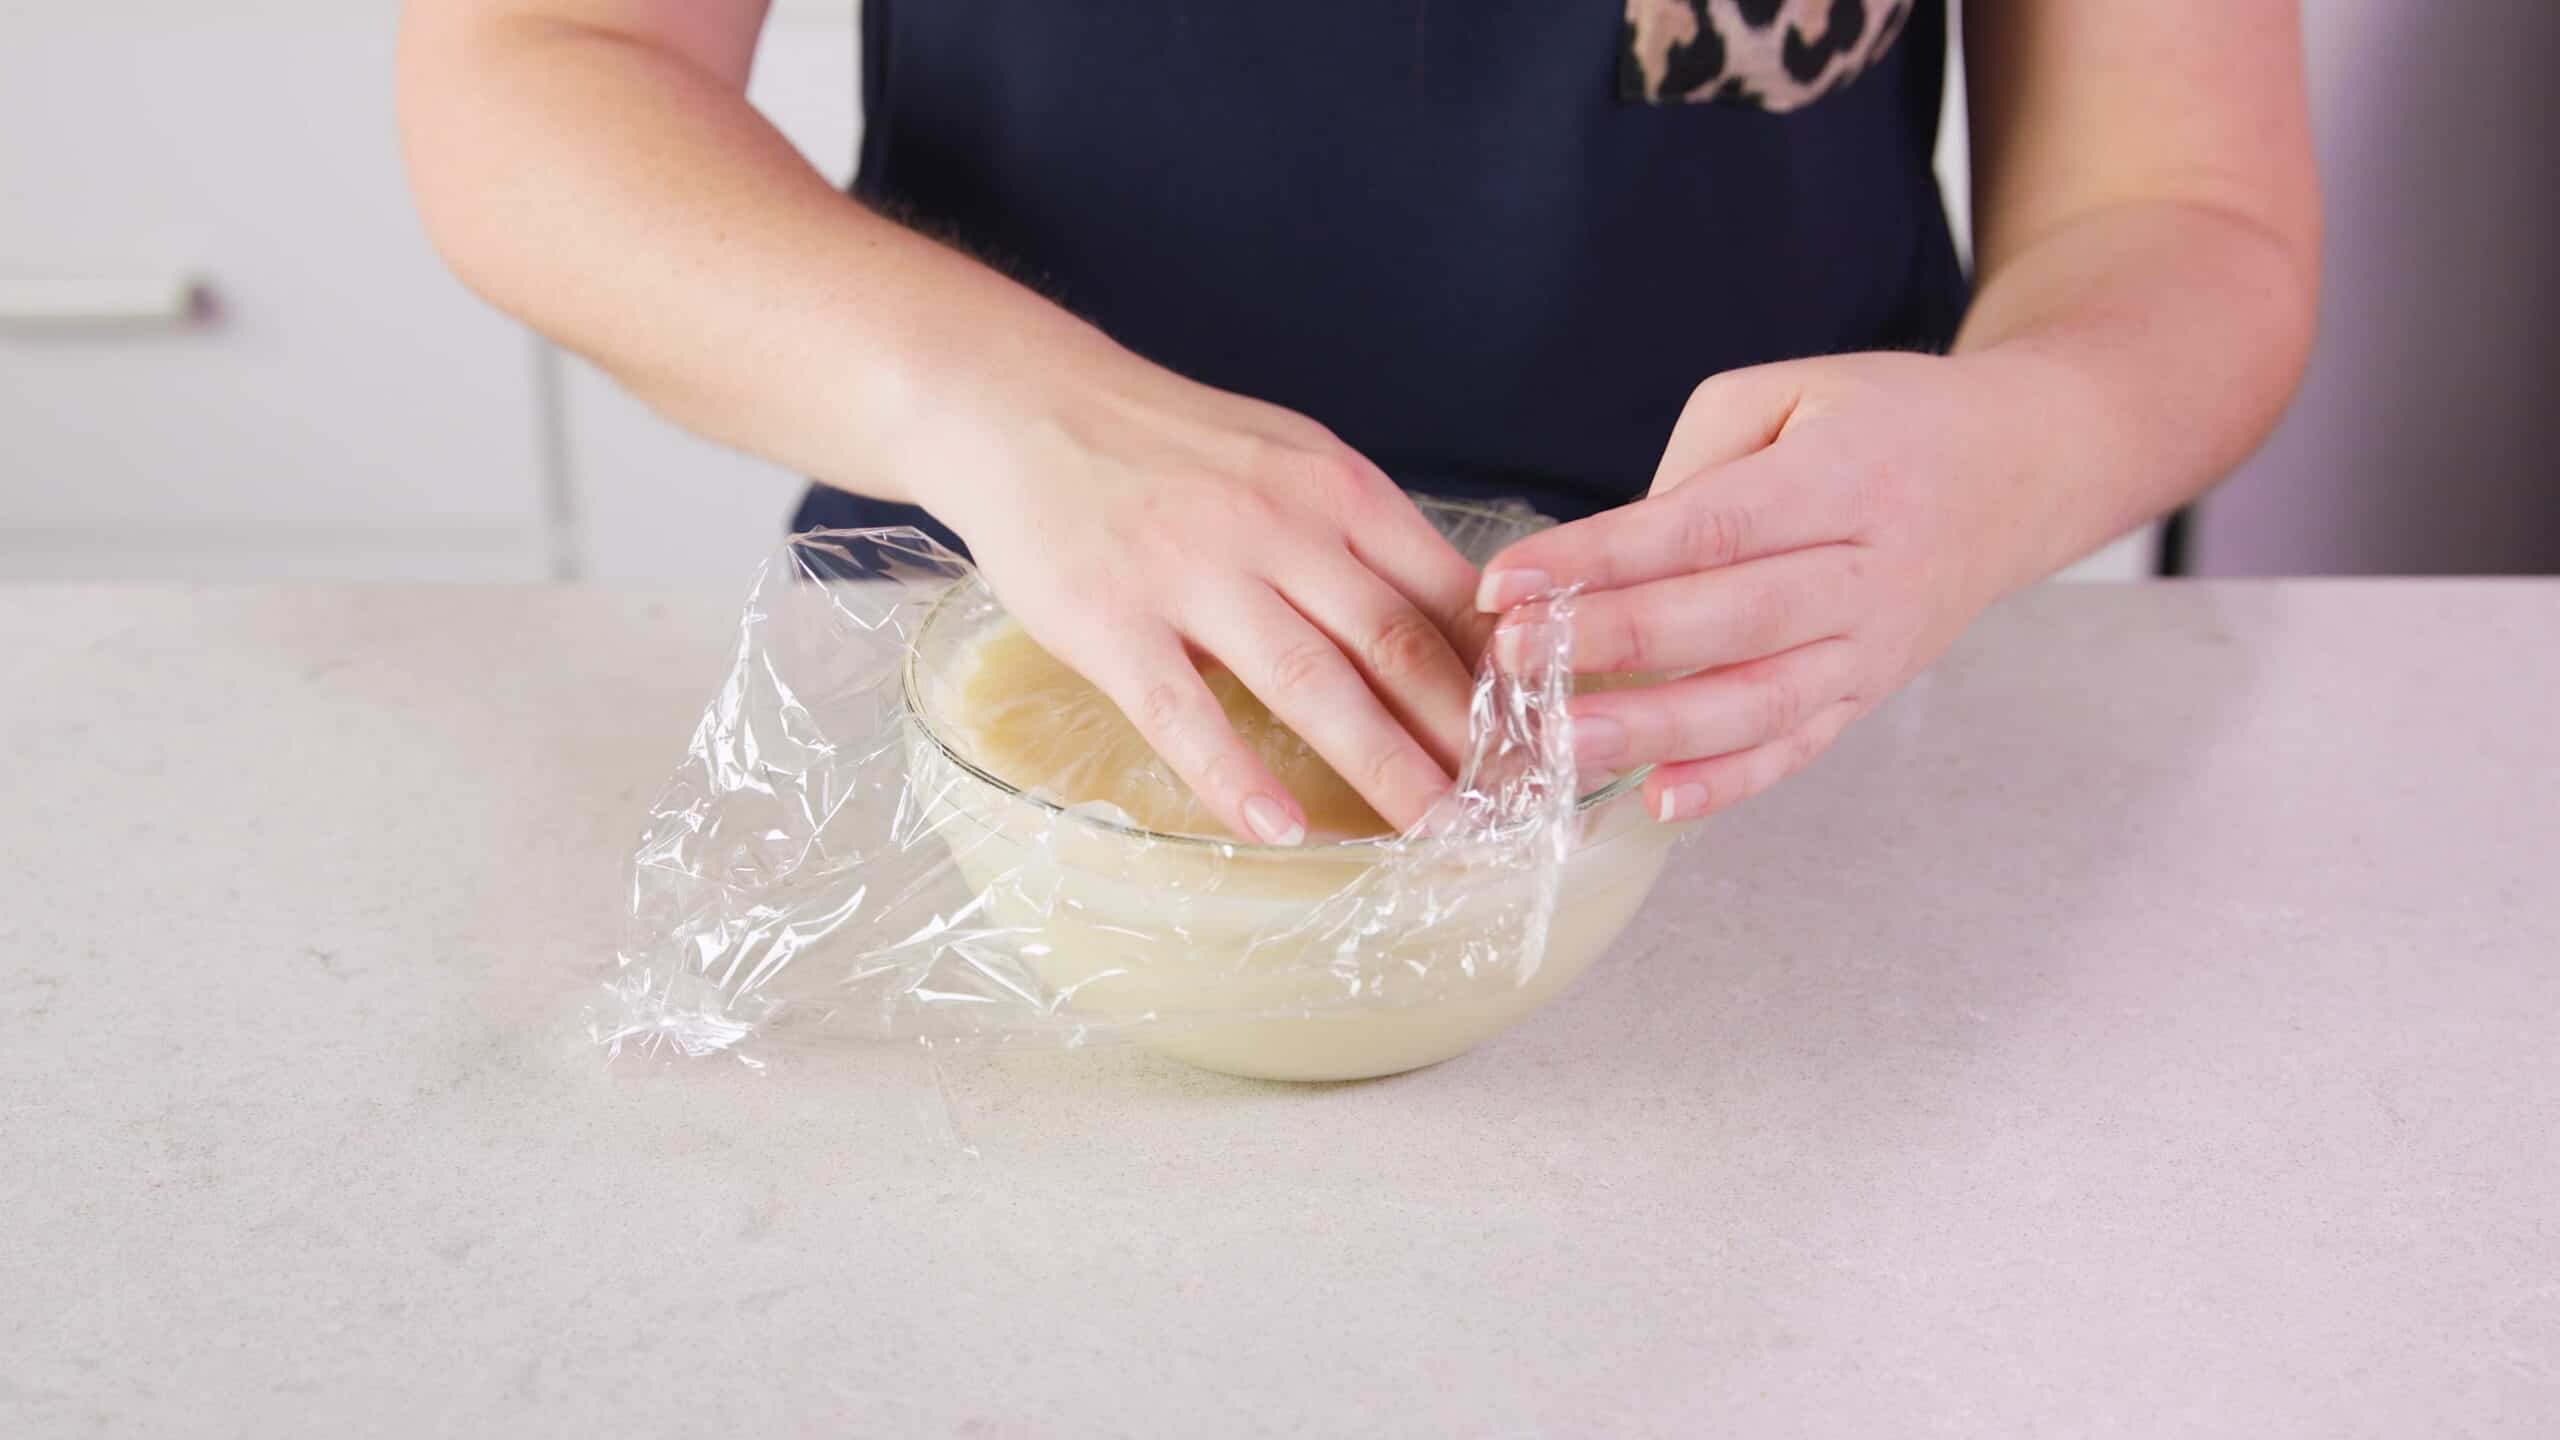 Angled view of clear glass mixing bowl filled with Ermine Icing and topped with clear plastic wrap to keep the top from stiffening while set aside.